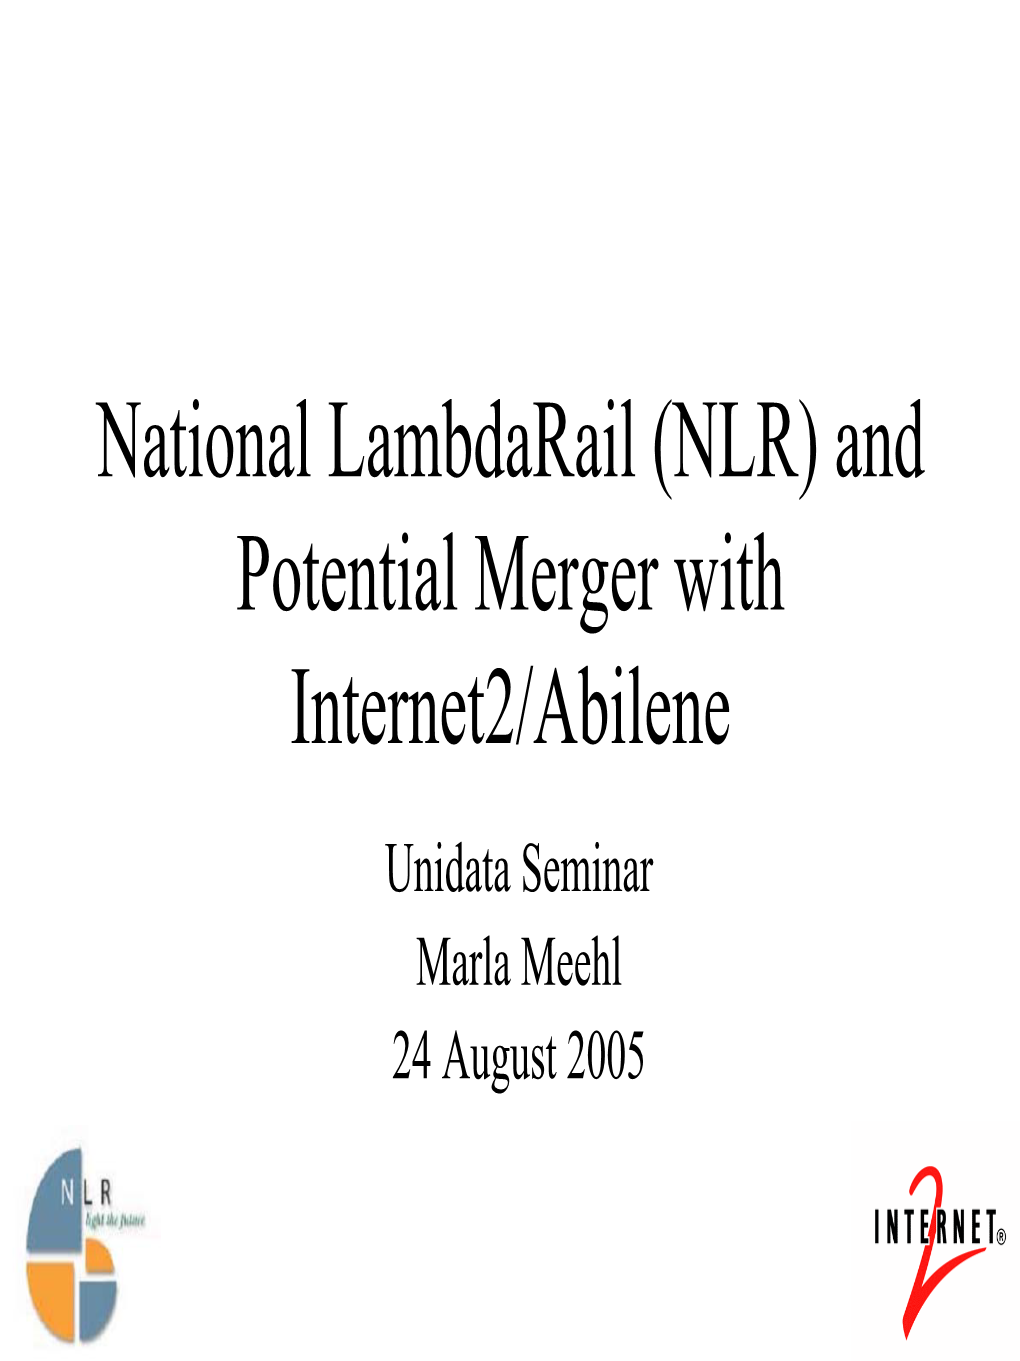 National Lambdarail (NLR) and Potential Merger with Internet2/Abilene Unidata Seminar Marla Meehl 24 August 2005 Outline